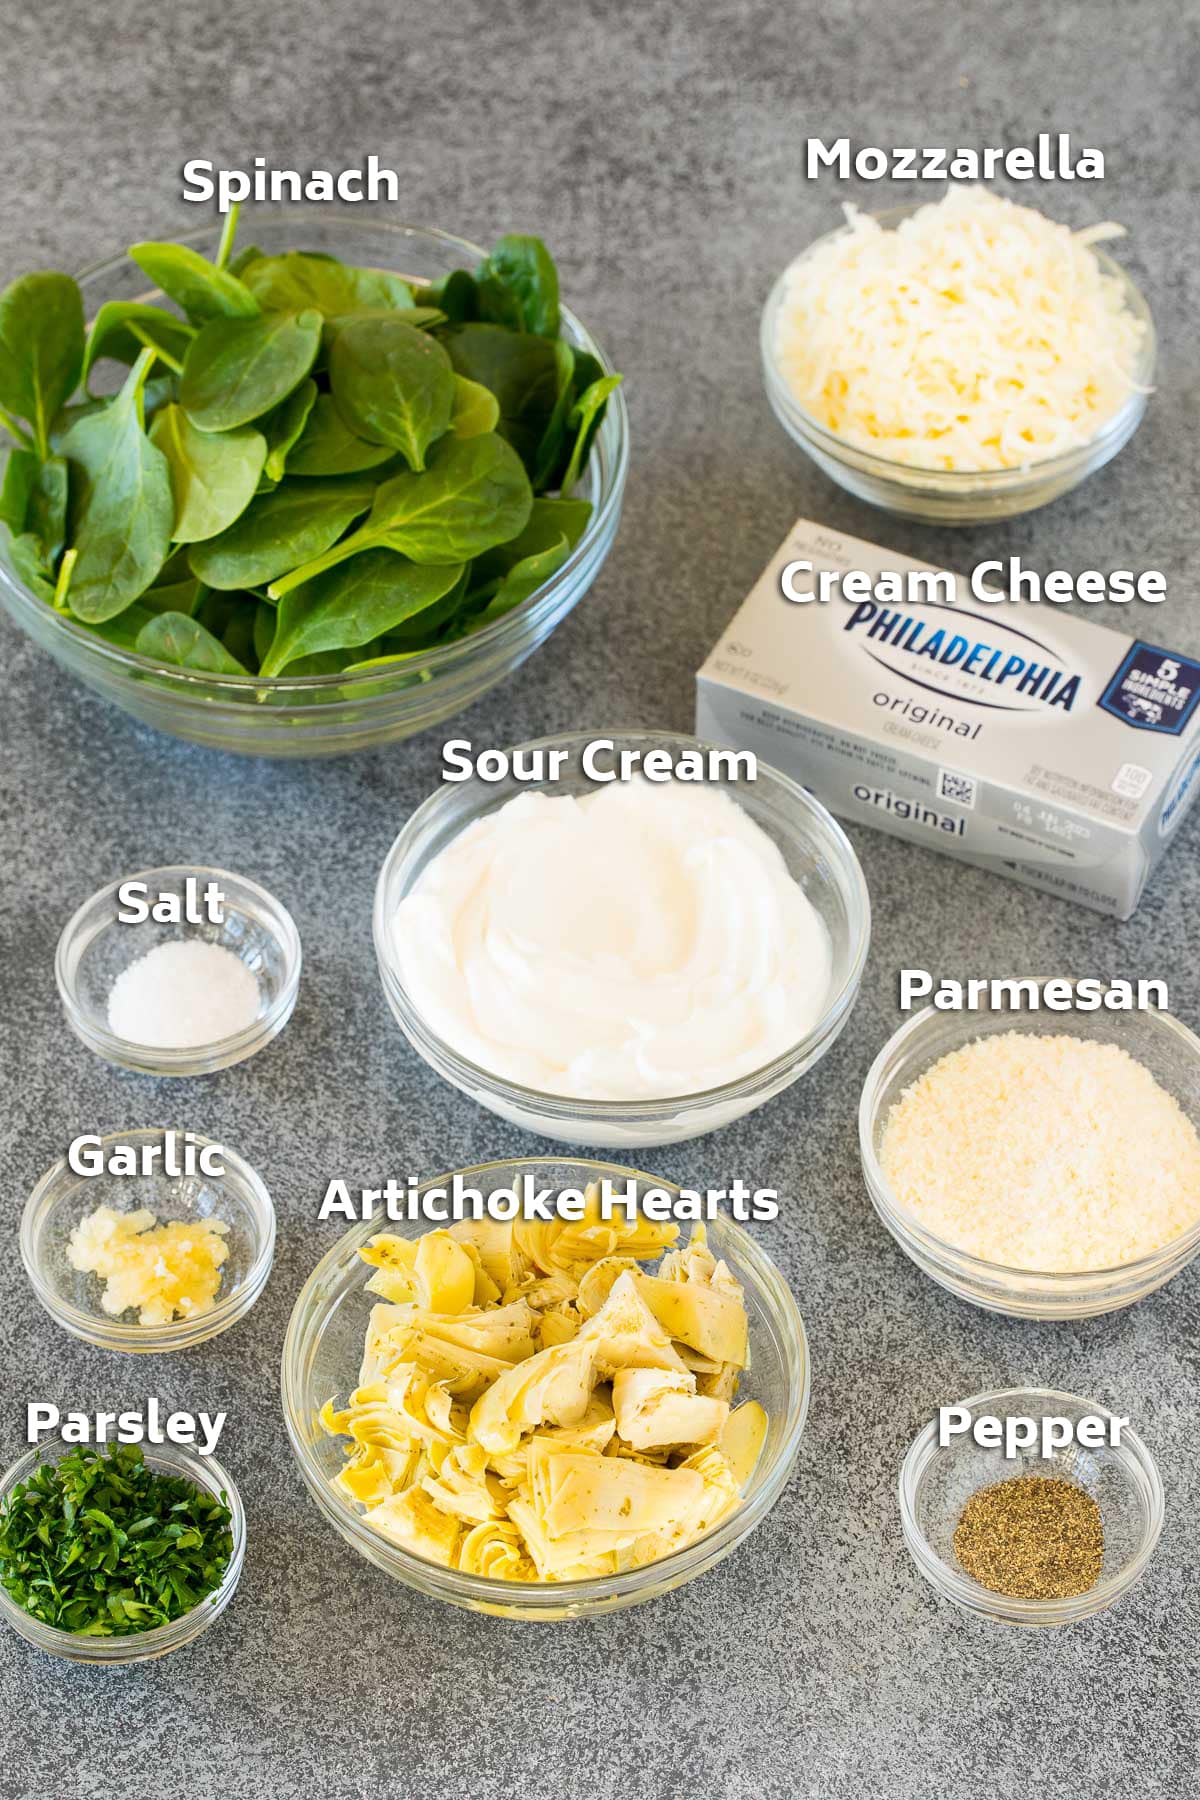 Bowls of ingredients including sour cream, cheese, spinach and artichokes.